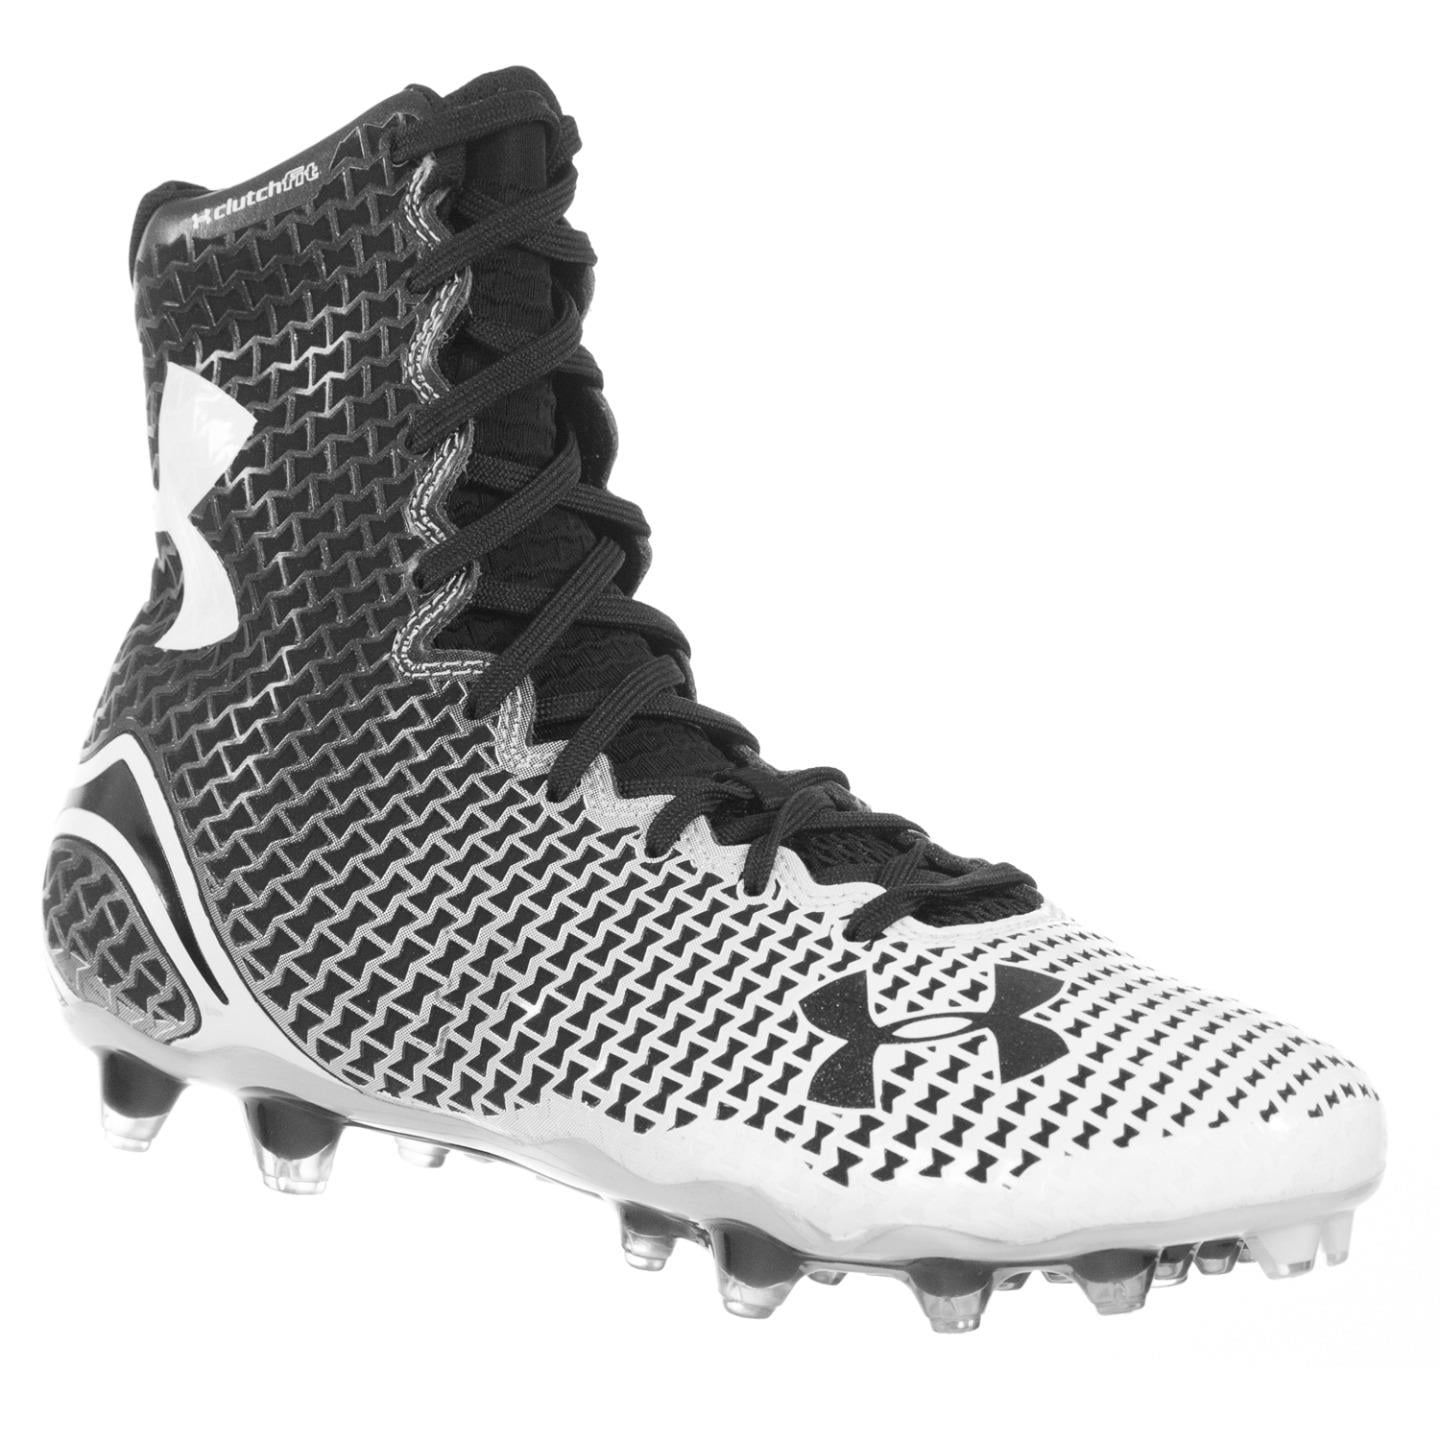 black and white under armour football cleats